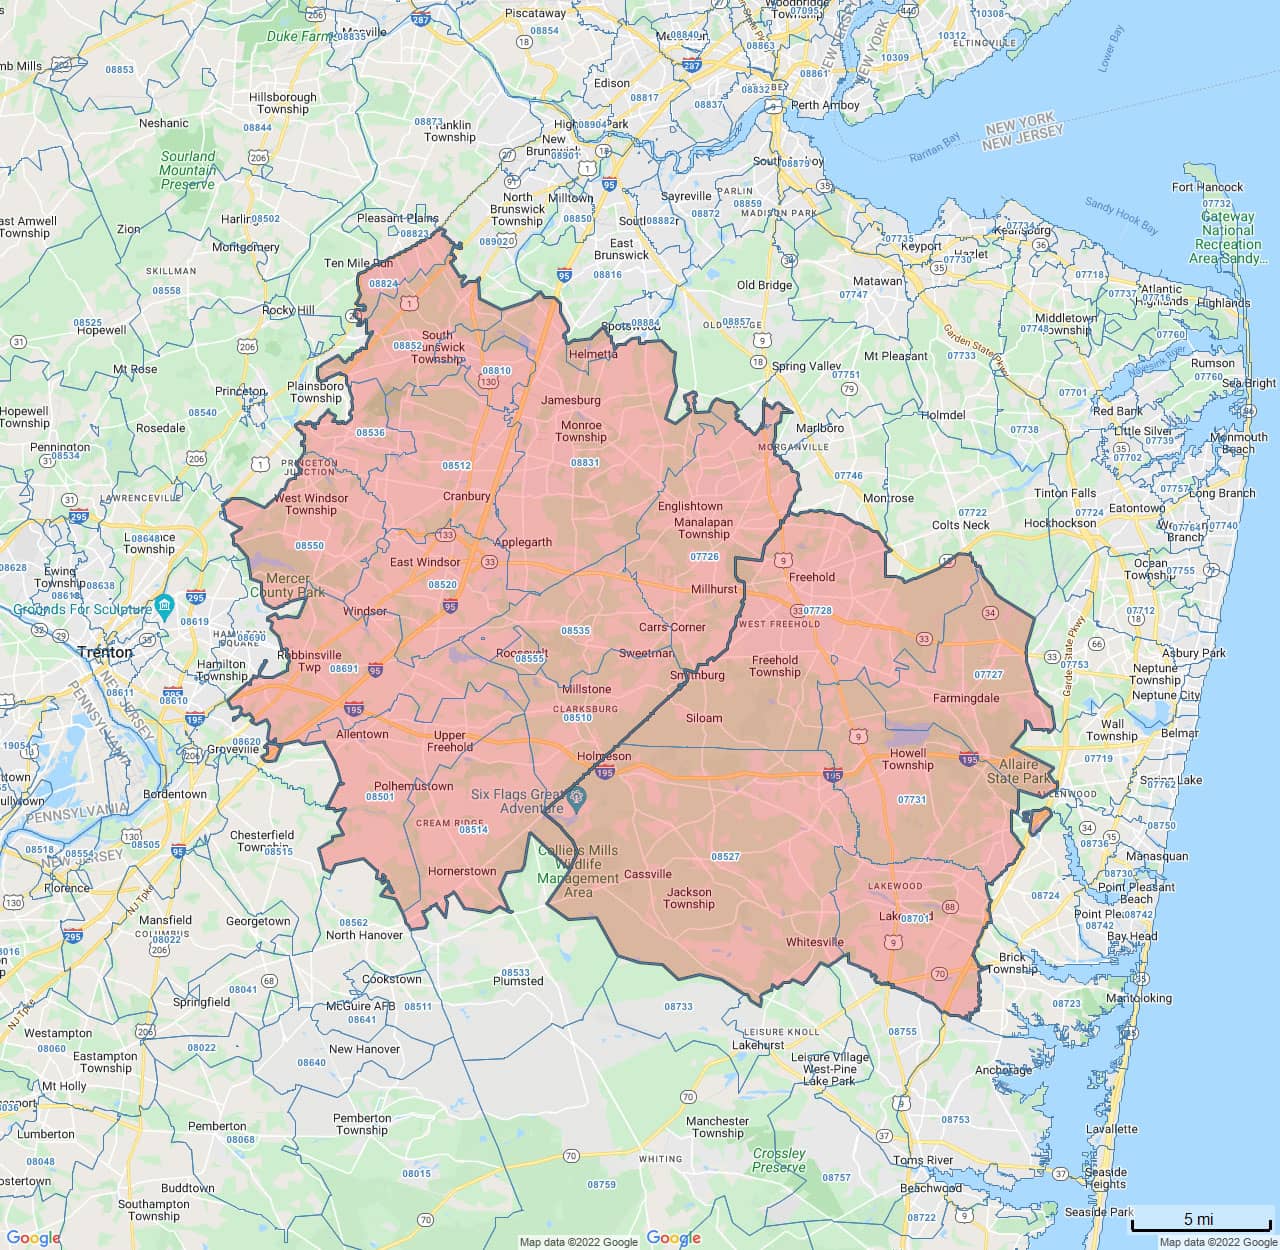 All Dry Services Area Coverage Map for Monmouth and Middlesex, NJ